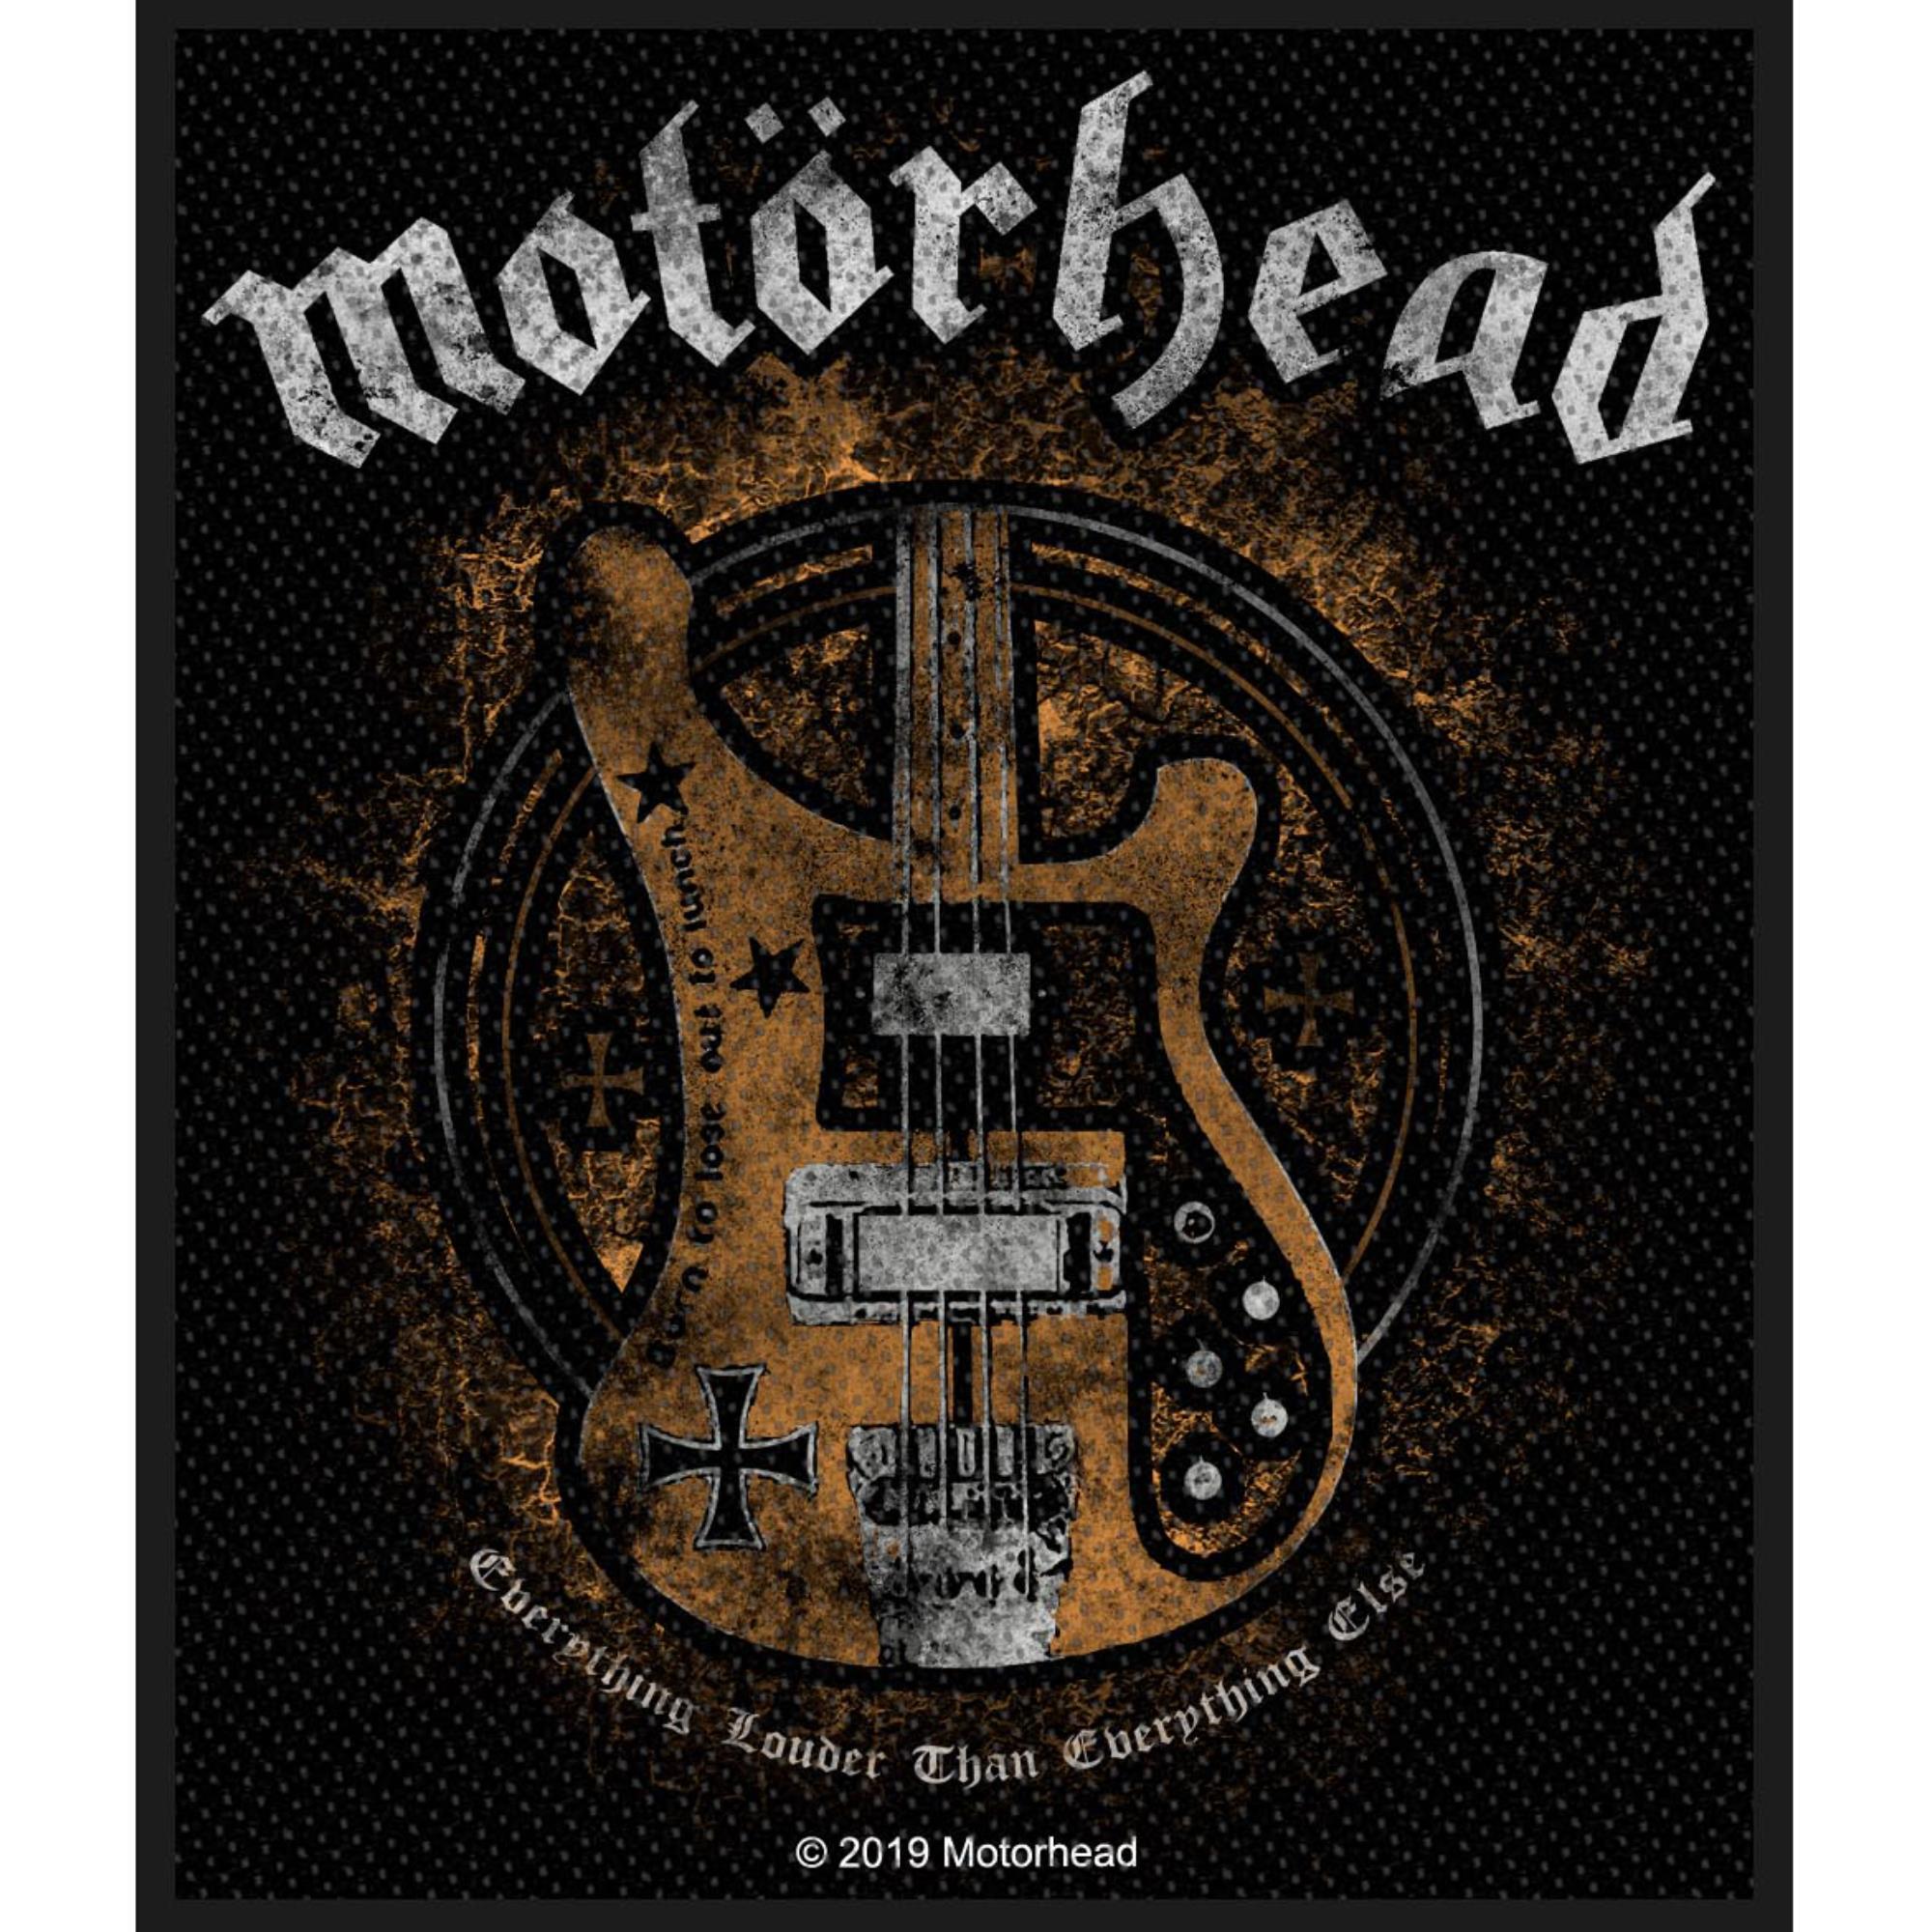 Motorhead Everything Louder giant backpatch sew-on cloth patch mm 